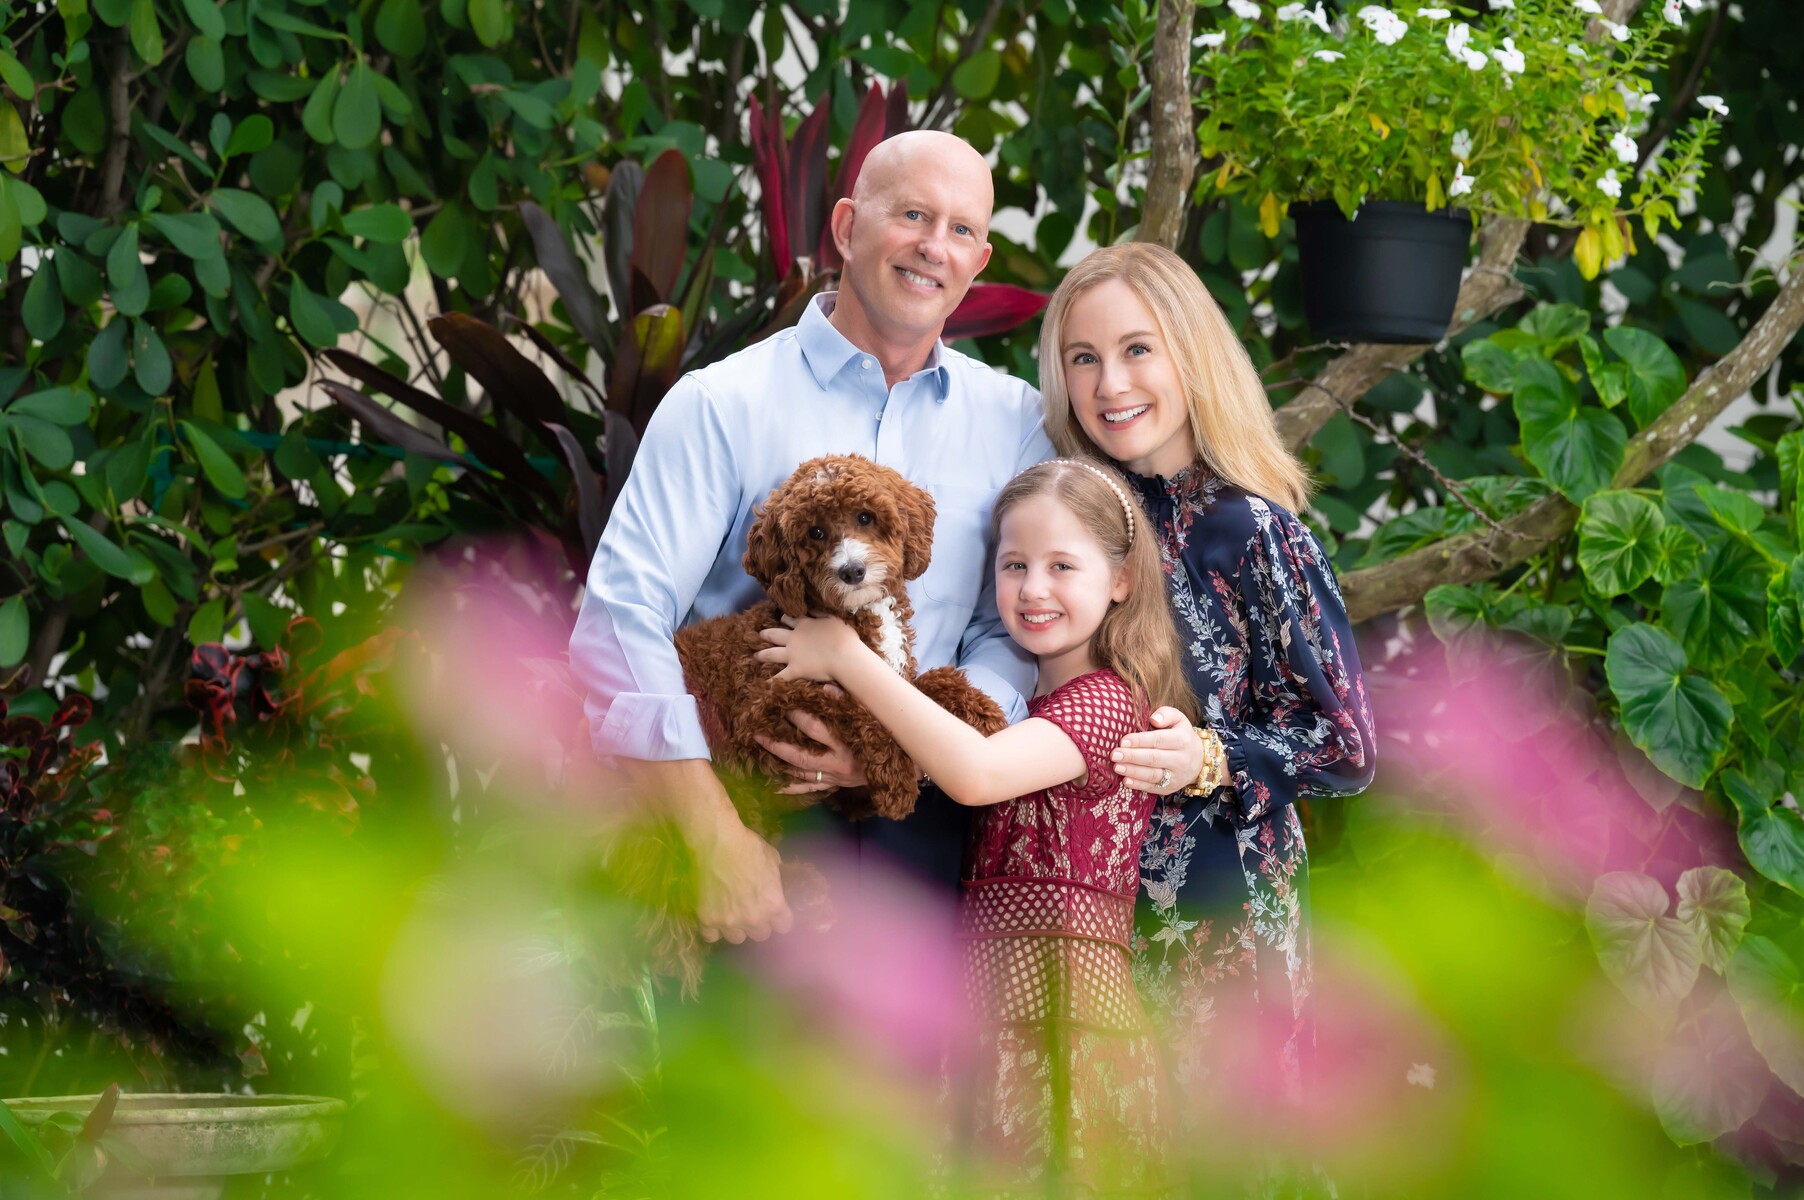 We specialize in family portraits and pet photography.